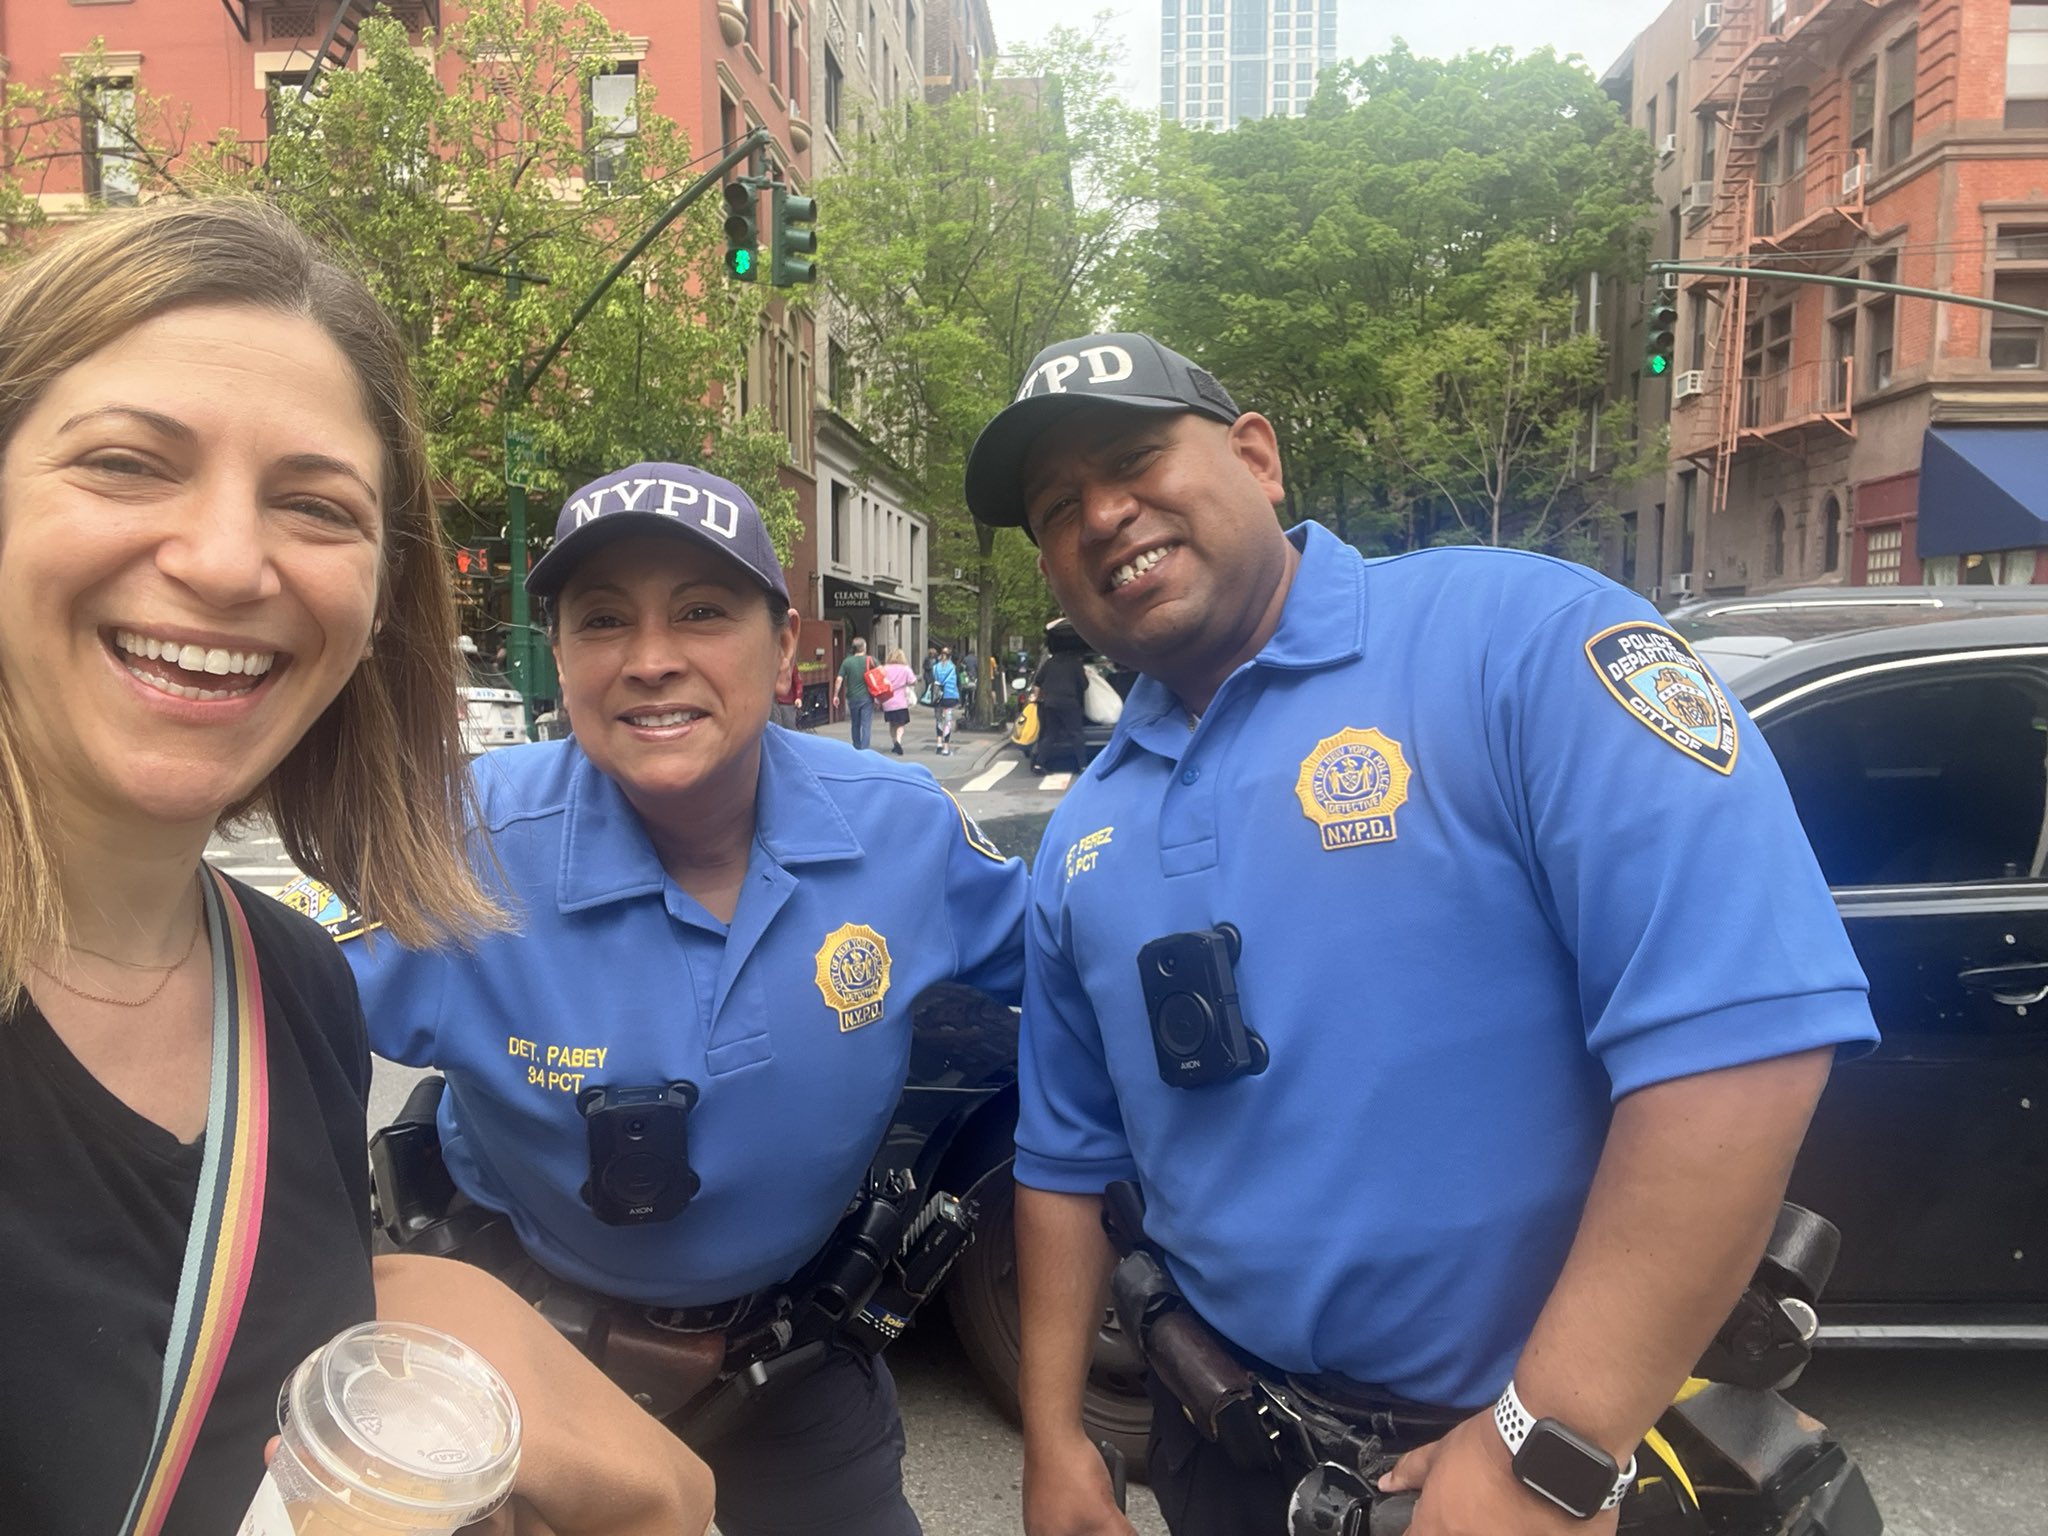 NYPD Th Precinct On Twitter RT Yaelbt Ran Into Two Of My Faves NYPD Pct Https T Co